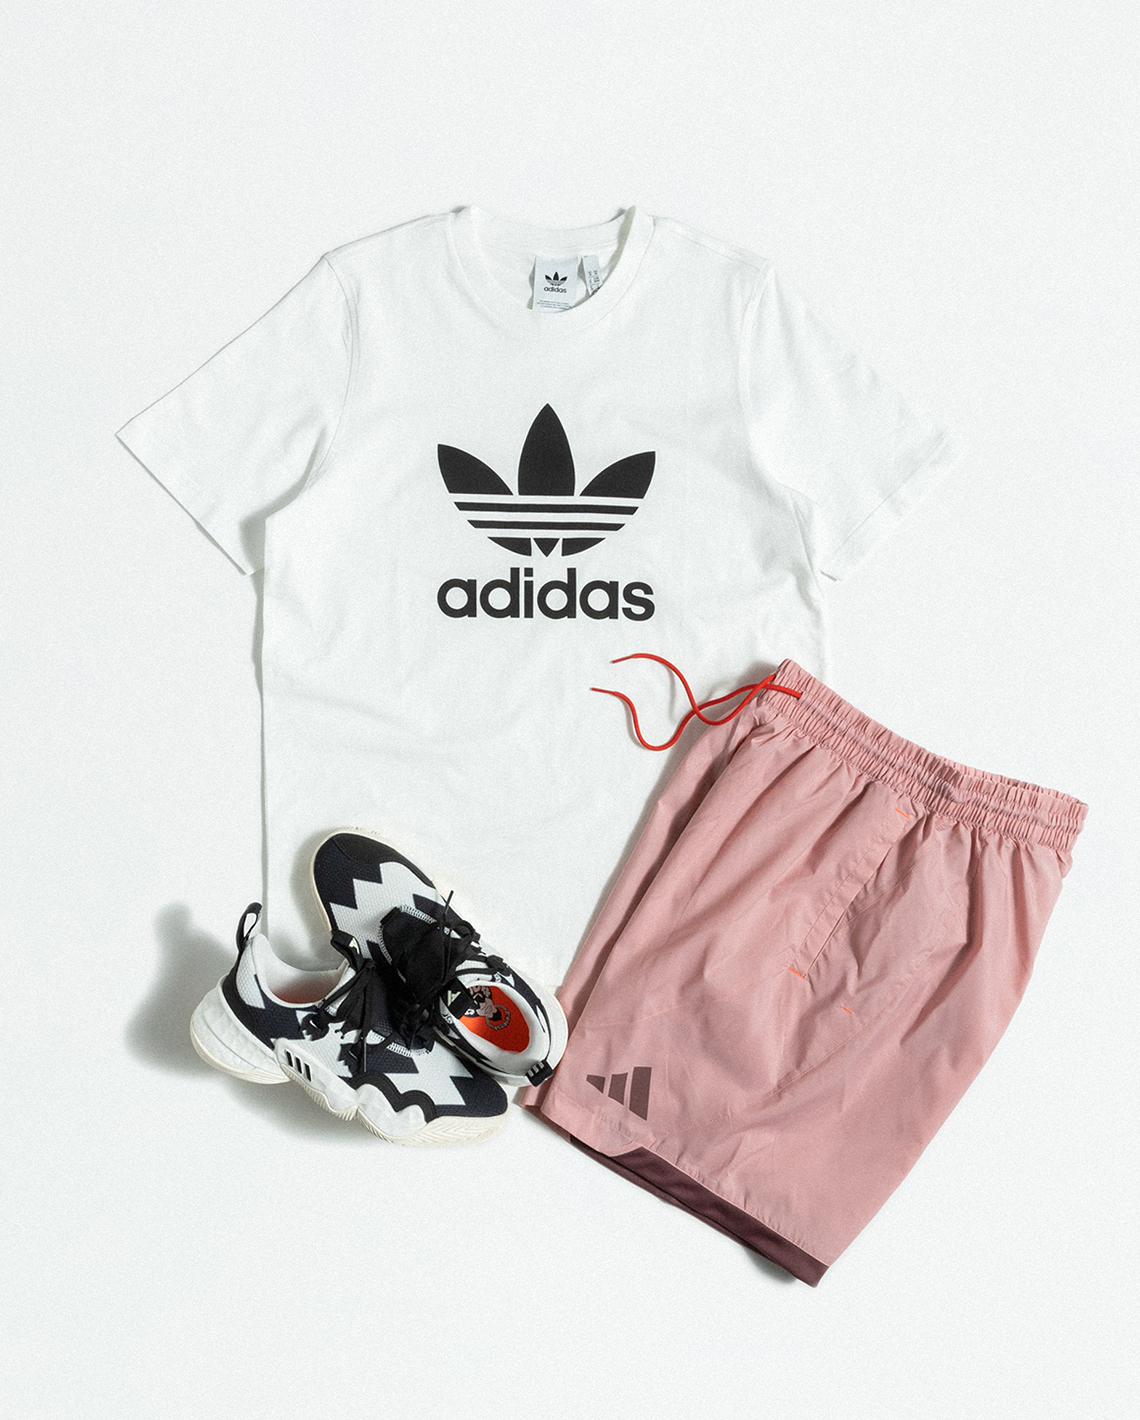 adidas apparel shopping guide march 2022 outfit 1 gallery 1